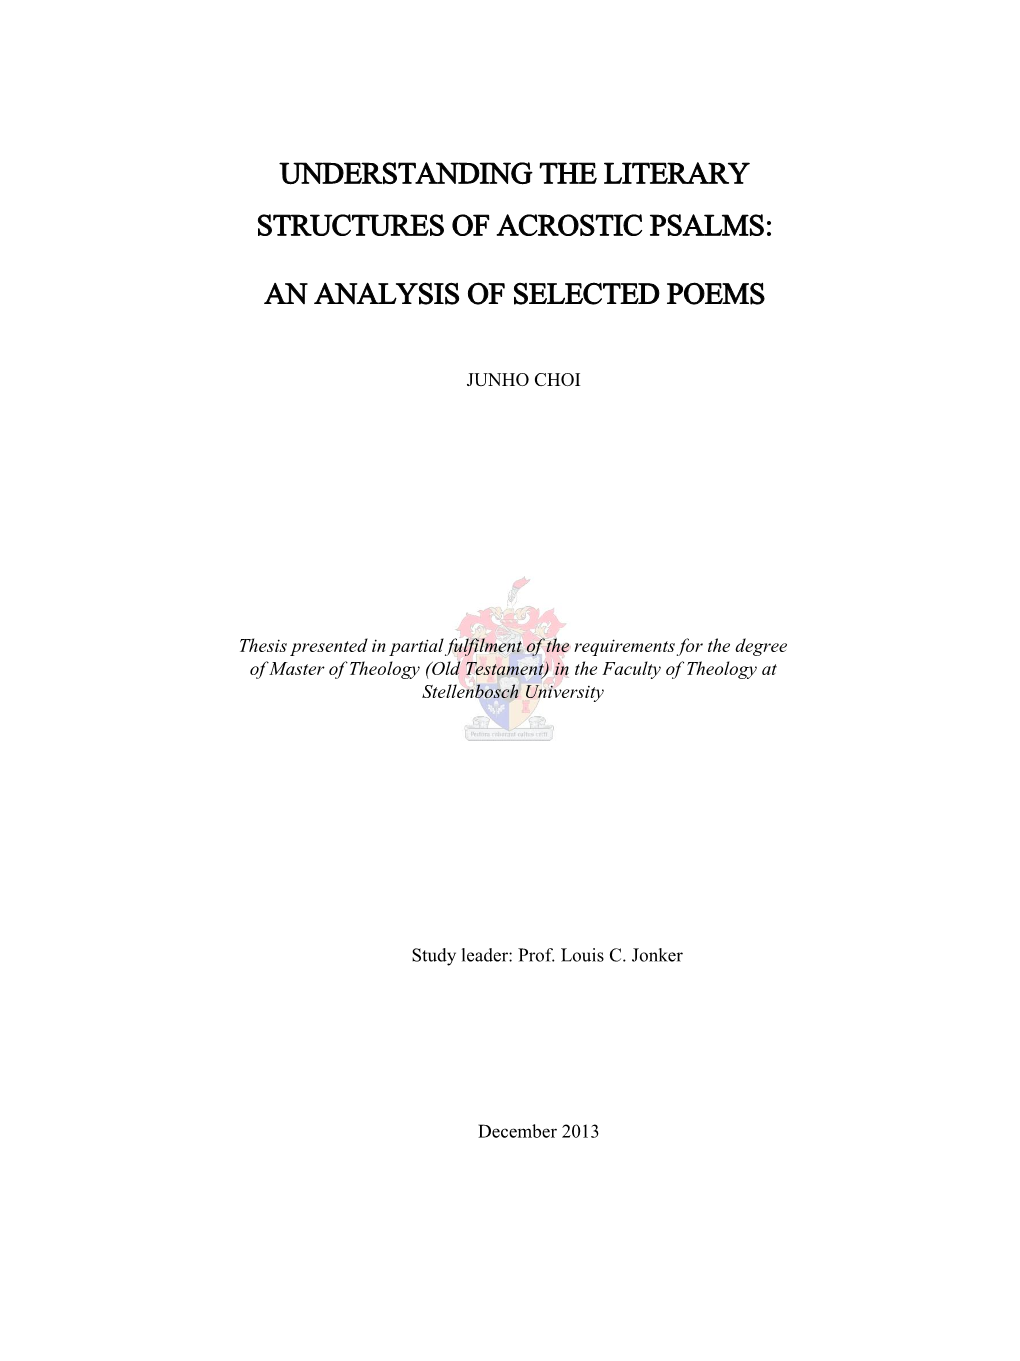 Understanding the Literary Structures of Acrostic Psalms